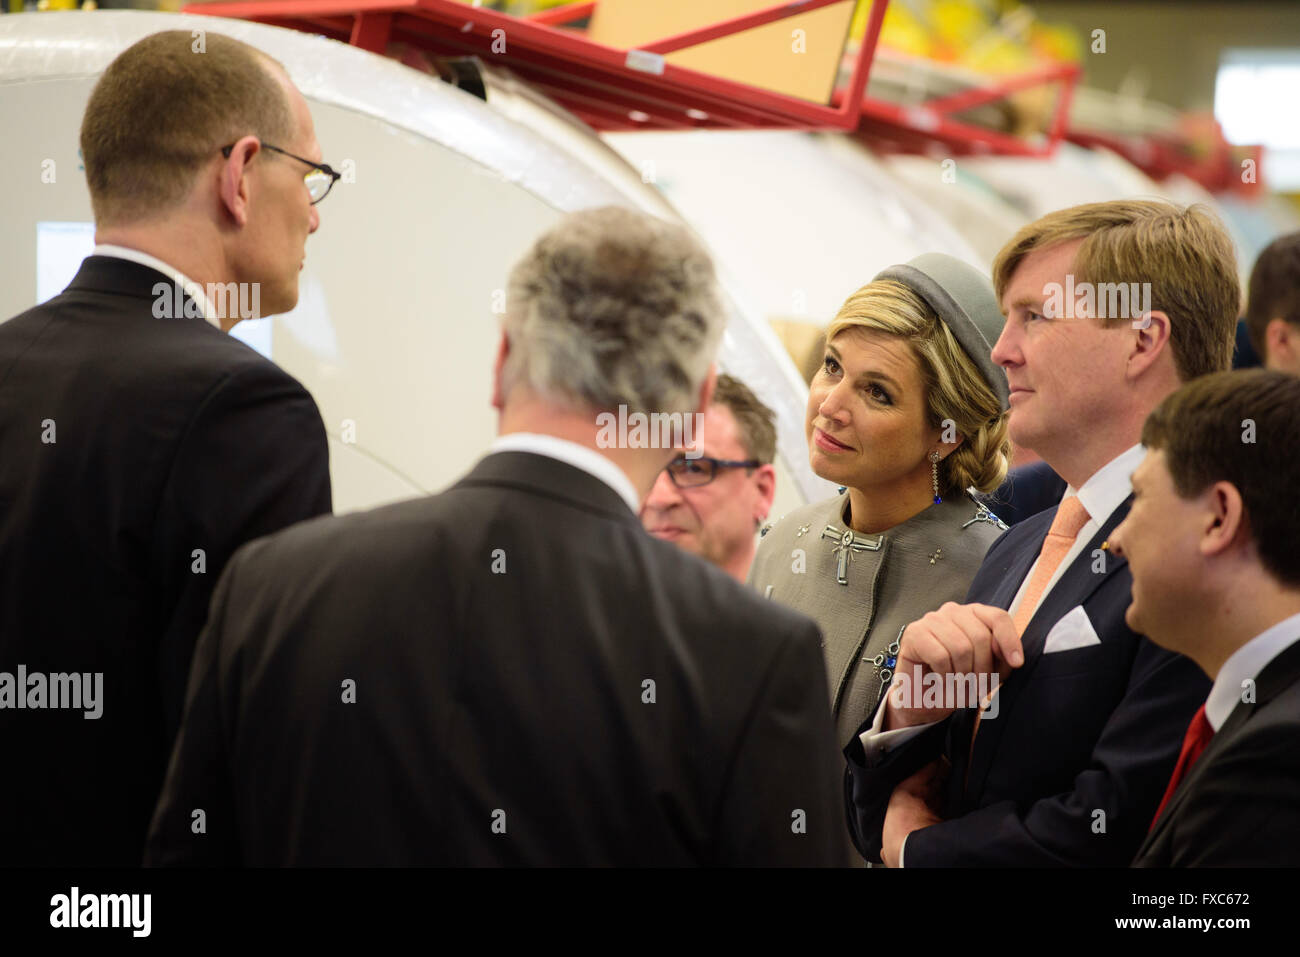 Erlangen, Germany. 14th Apr, 2016. The CEO of Siemens Healthcare, Bernd Montag (L), speaks with Queen Maxima (3.f.R.) and King Willem-Alexander (2.f.R.) of the Netherlands during a visit to Siemens Healthcare in Erlangen, Germany, 14 April 2016. The Dutch royal couple are on a two-day visit to Bavaria. Photo: NICOLAS ARMER/dpa/Alamy Live News Stock Photo